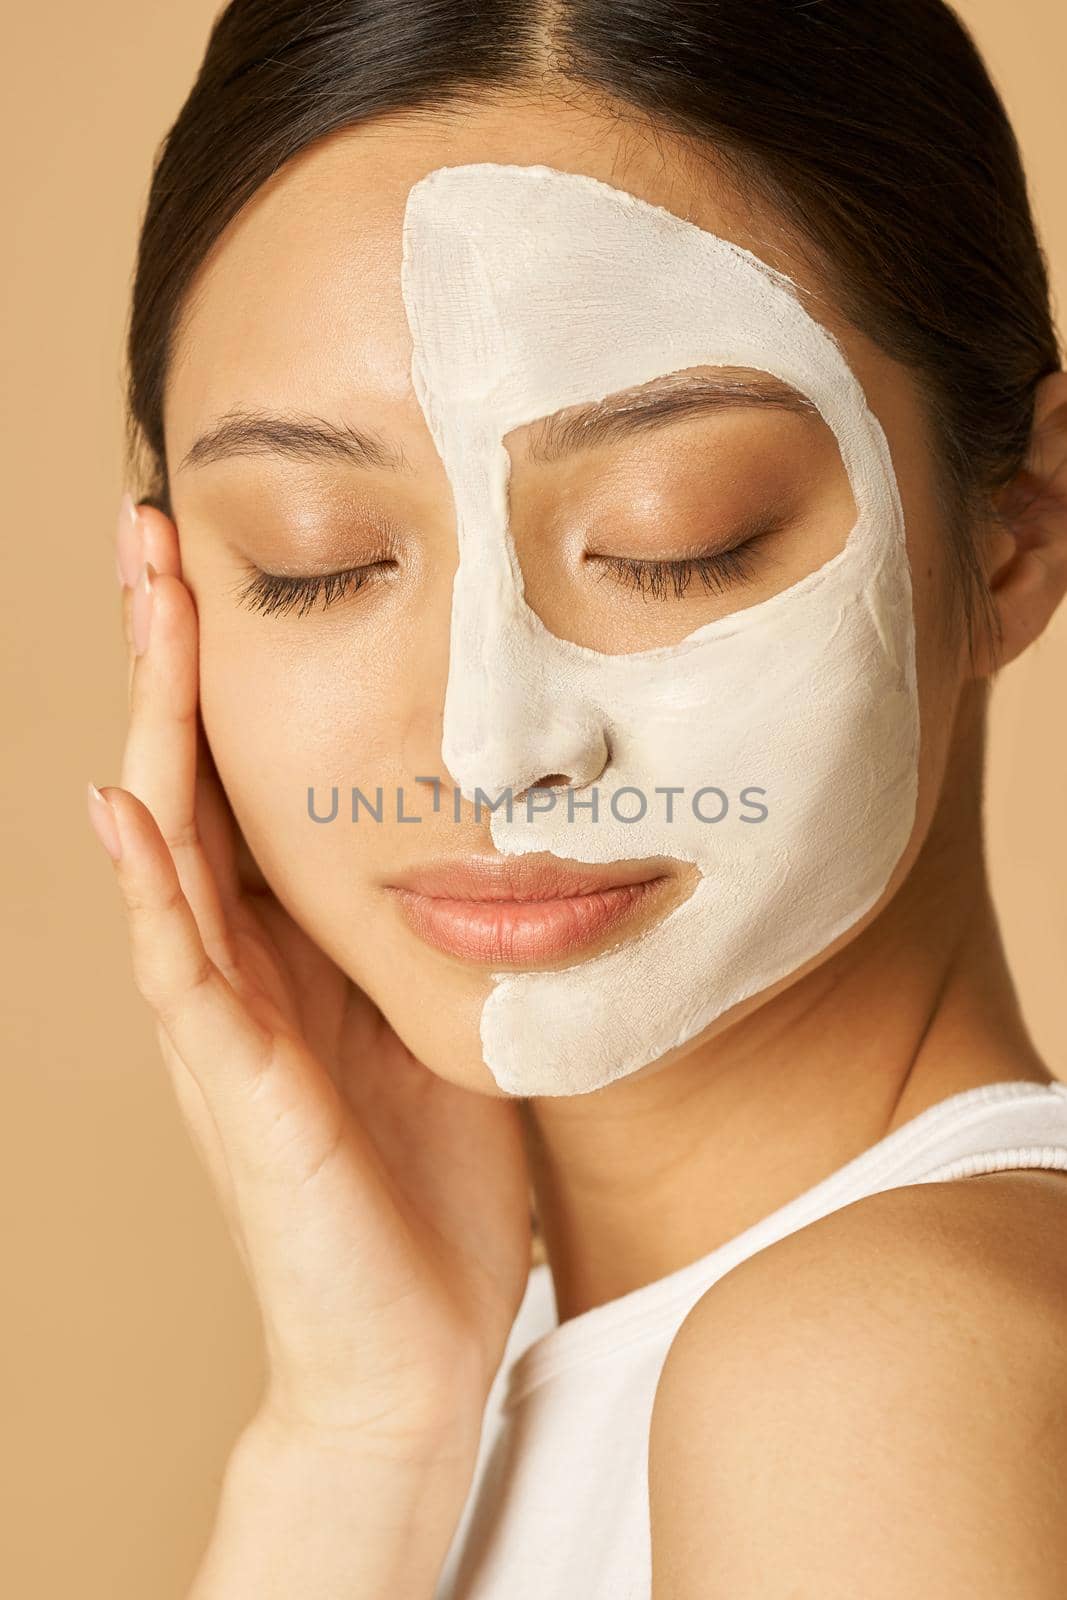 Relaxed young woman with facial mask applied on half of her face receiving spa treatments, posing for camera with eyes closed isolated over beige background. Beauty, skincare concept